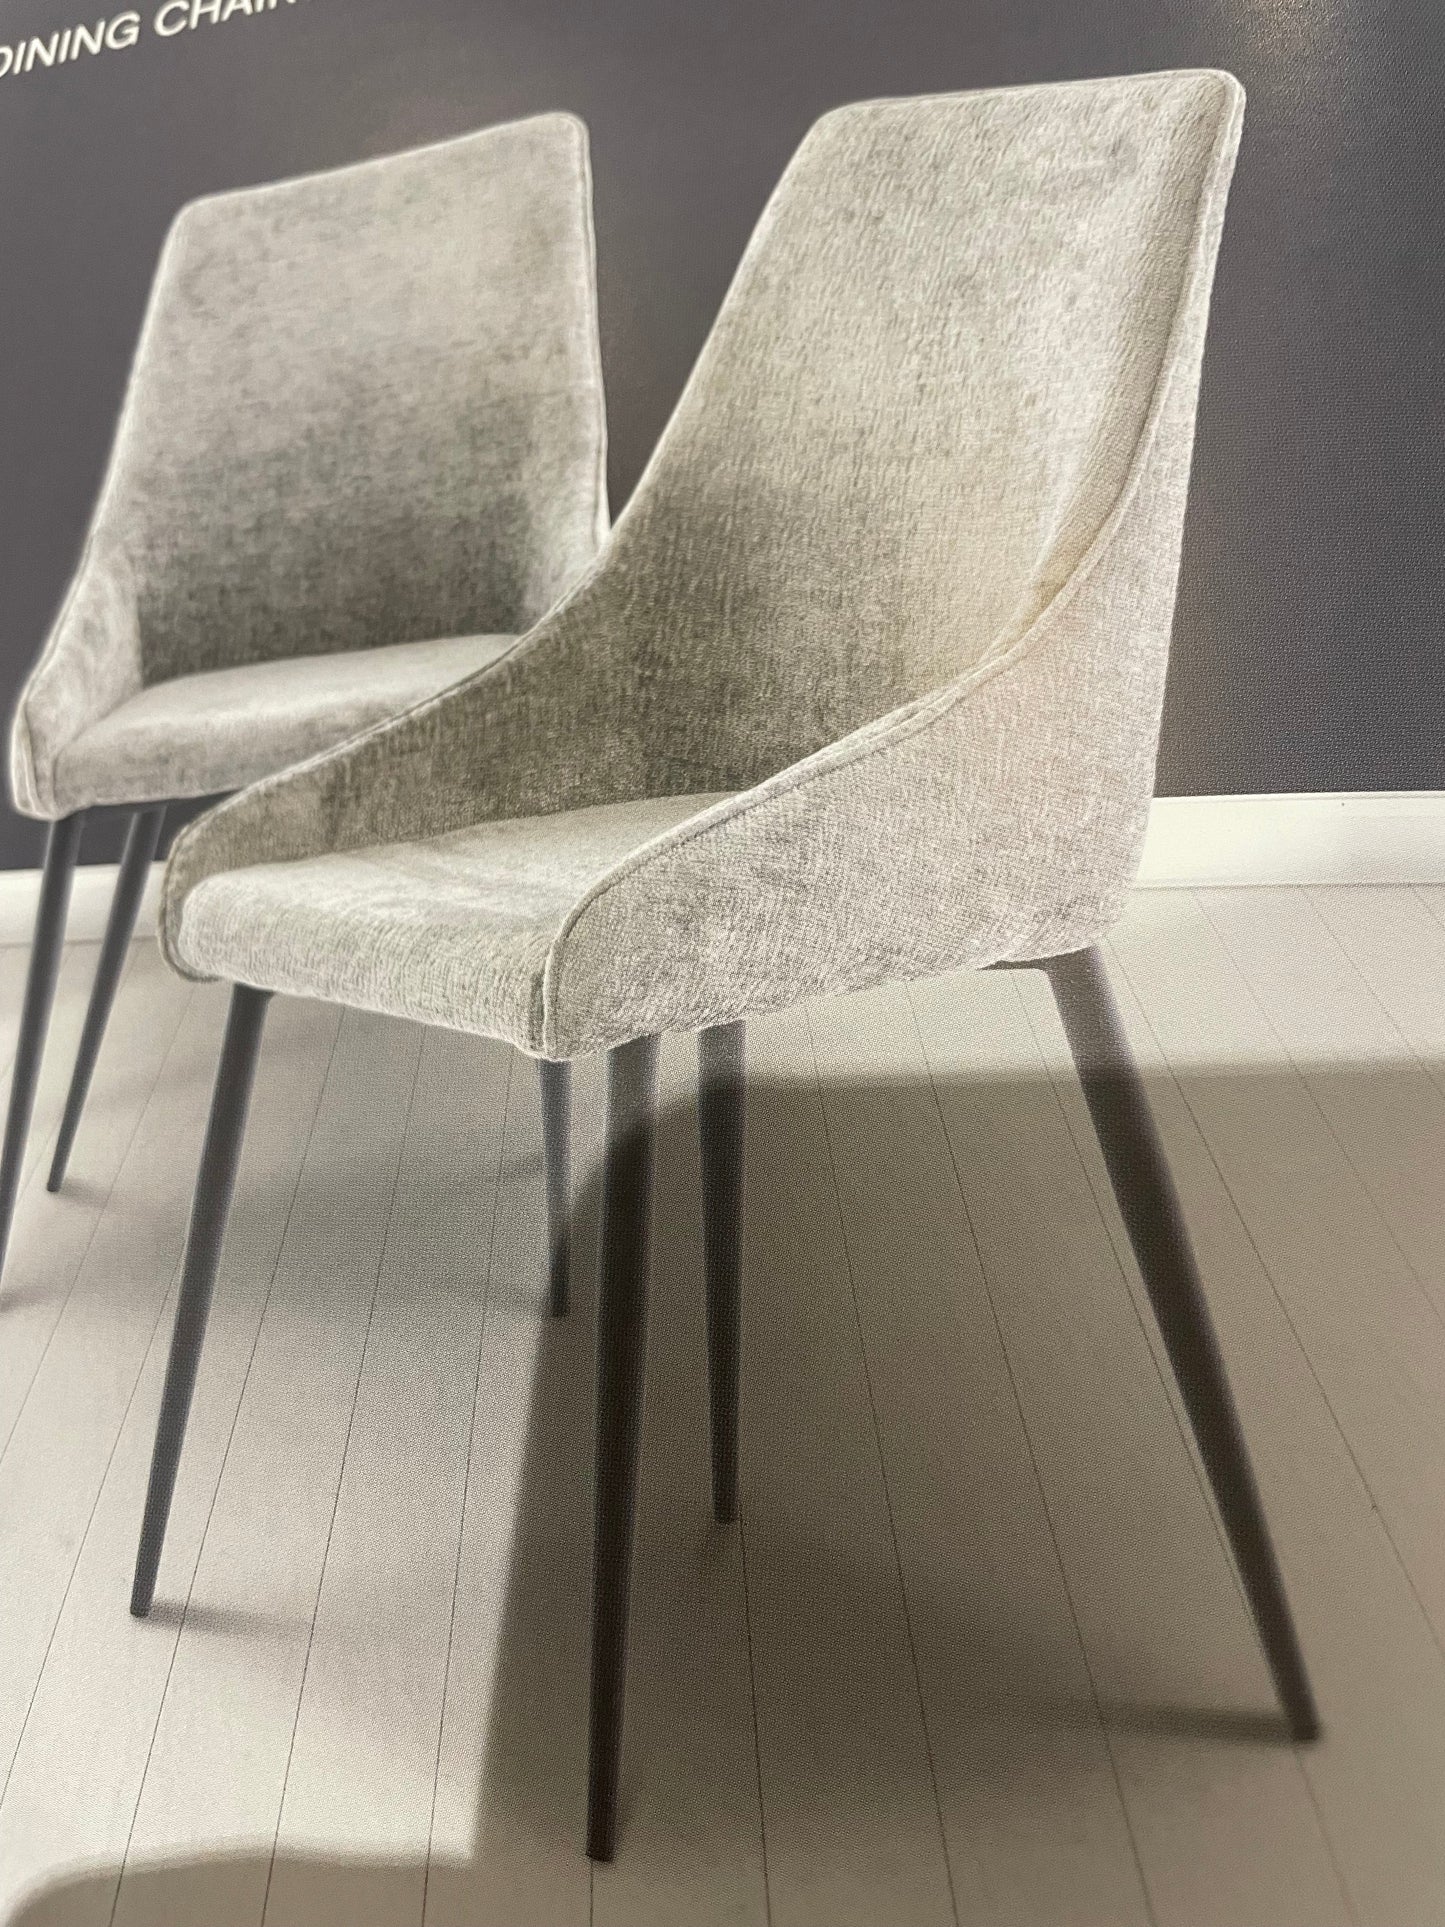 New Mallory  Dining Chair  boucle  set  of 6 available Instore  for collection